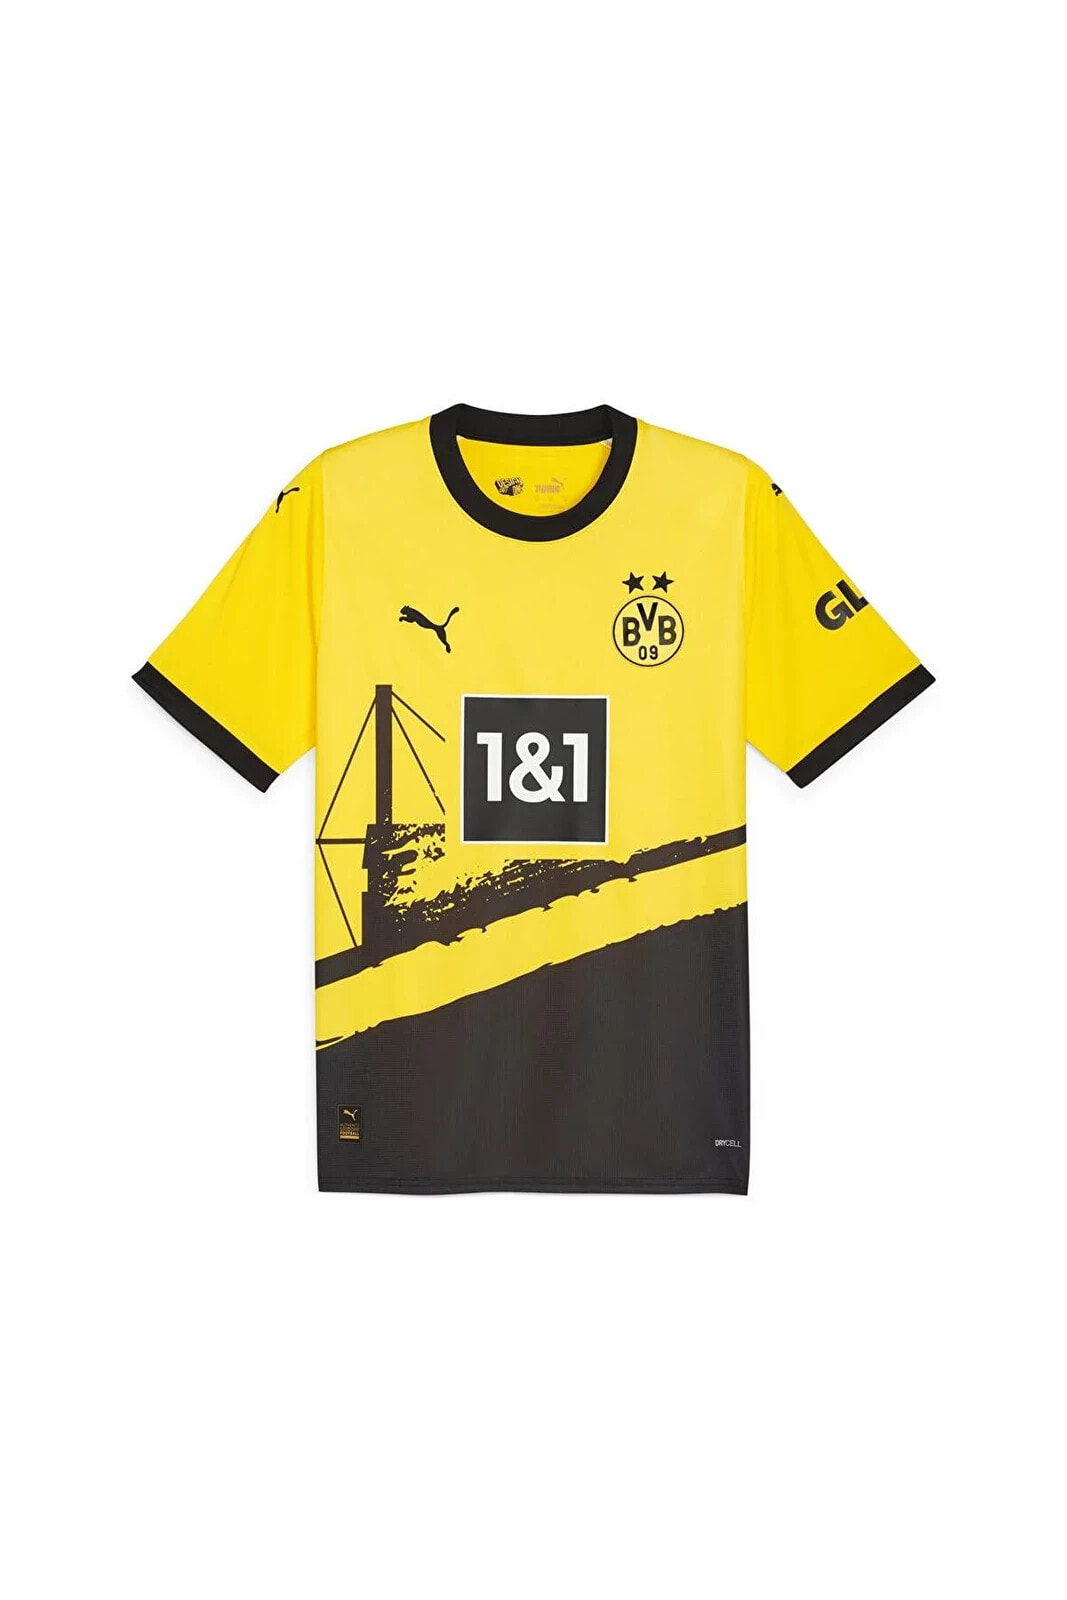 Bvb Home Jersey Forma